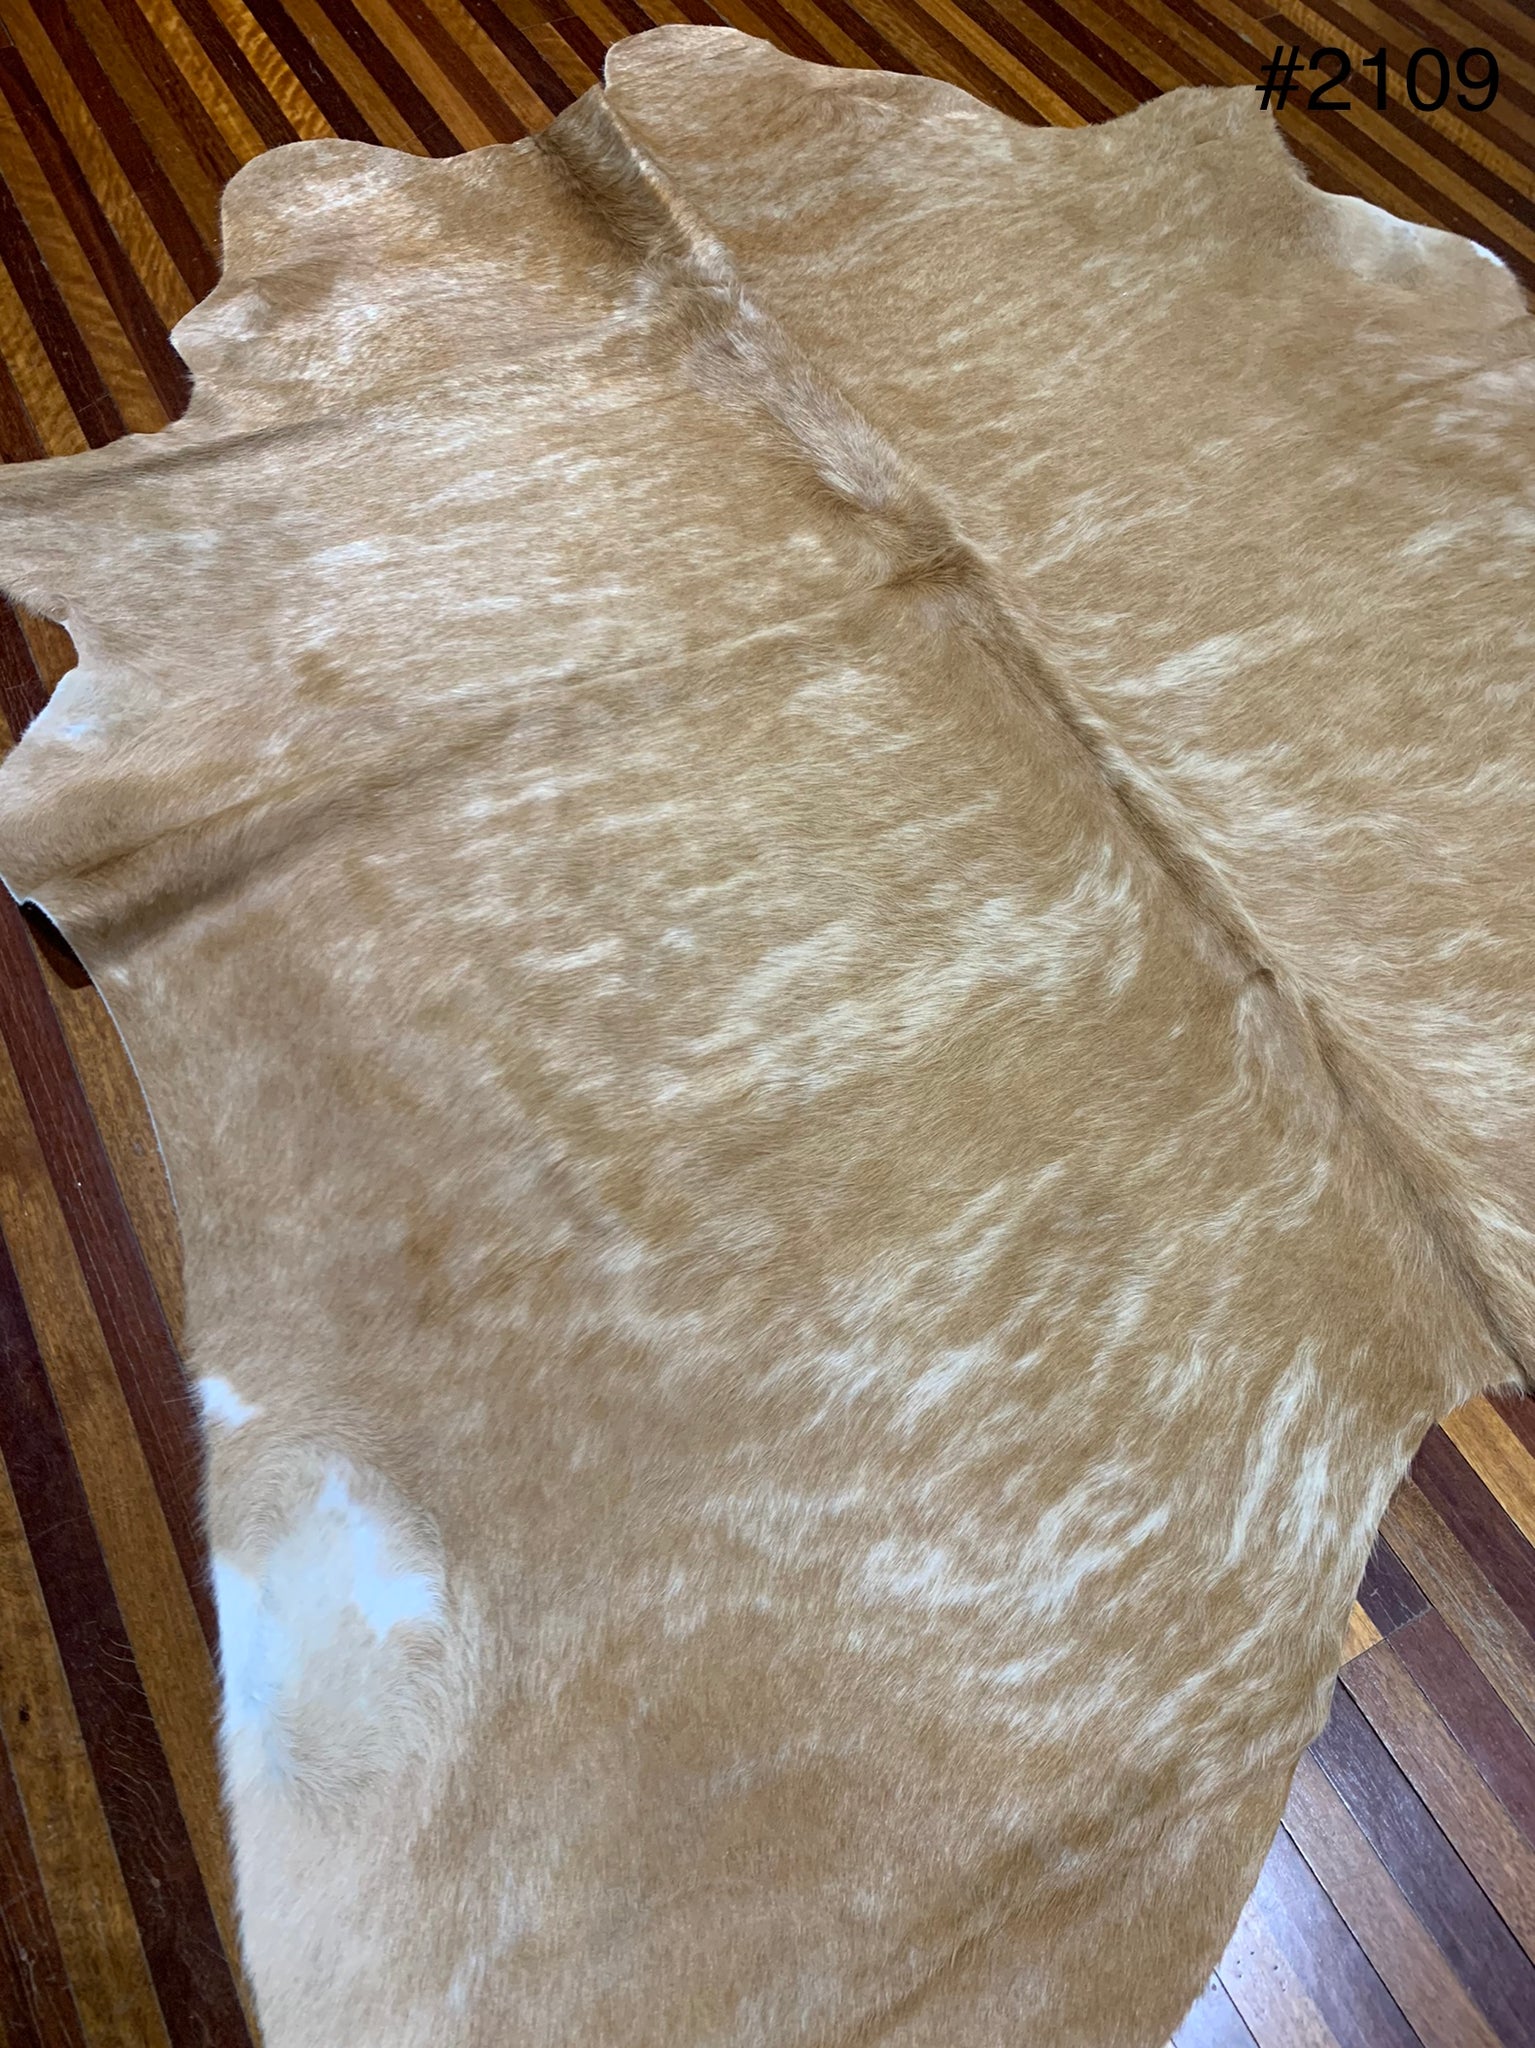 Coffee Table Cow Hide #2109